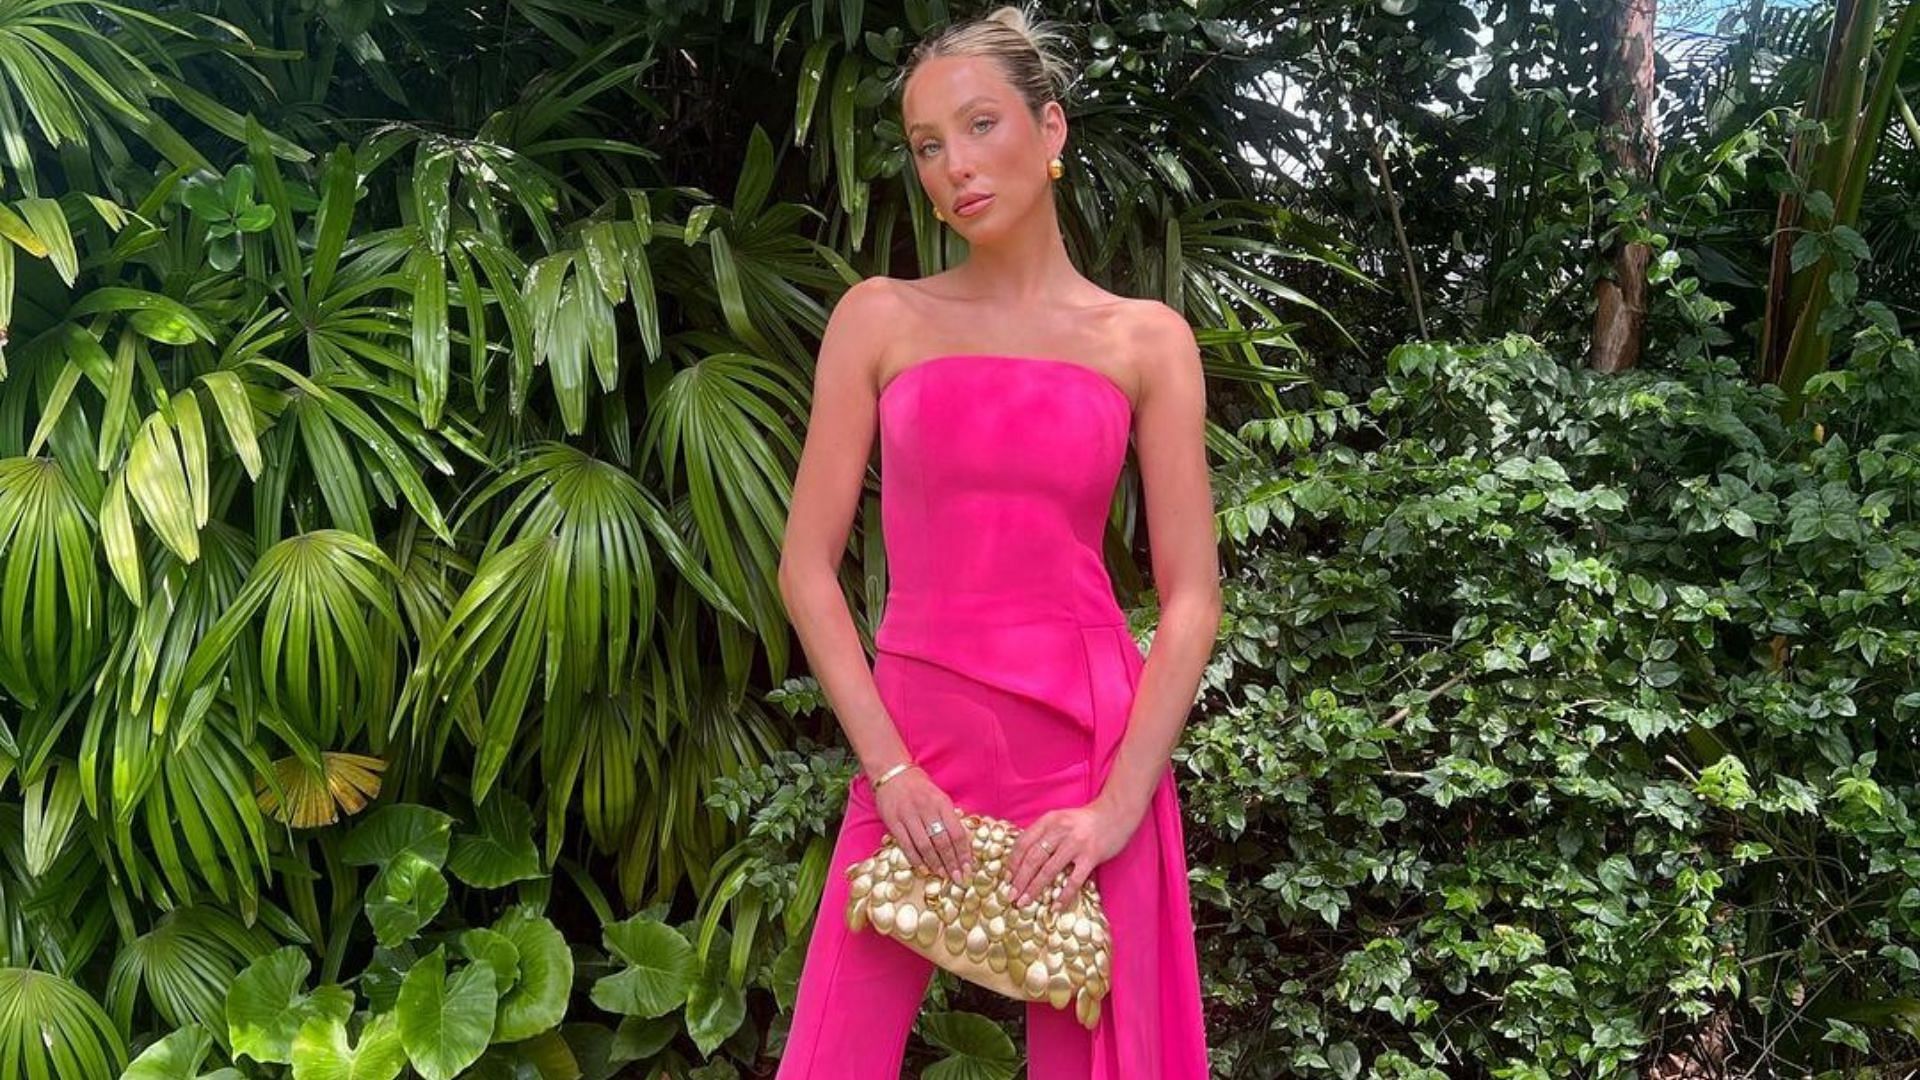 Alix Earle’s Barbie premiere fit check has fans fawning in her comments